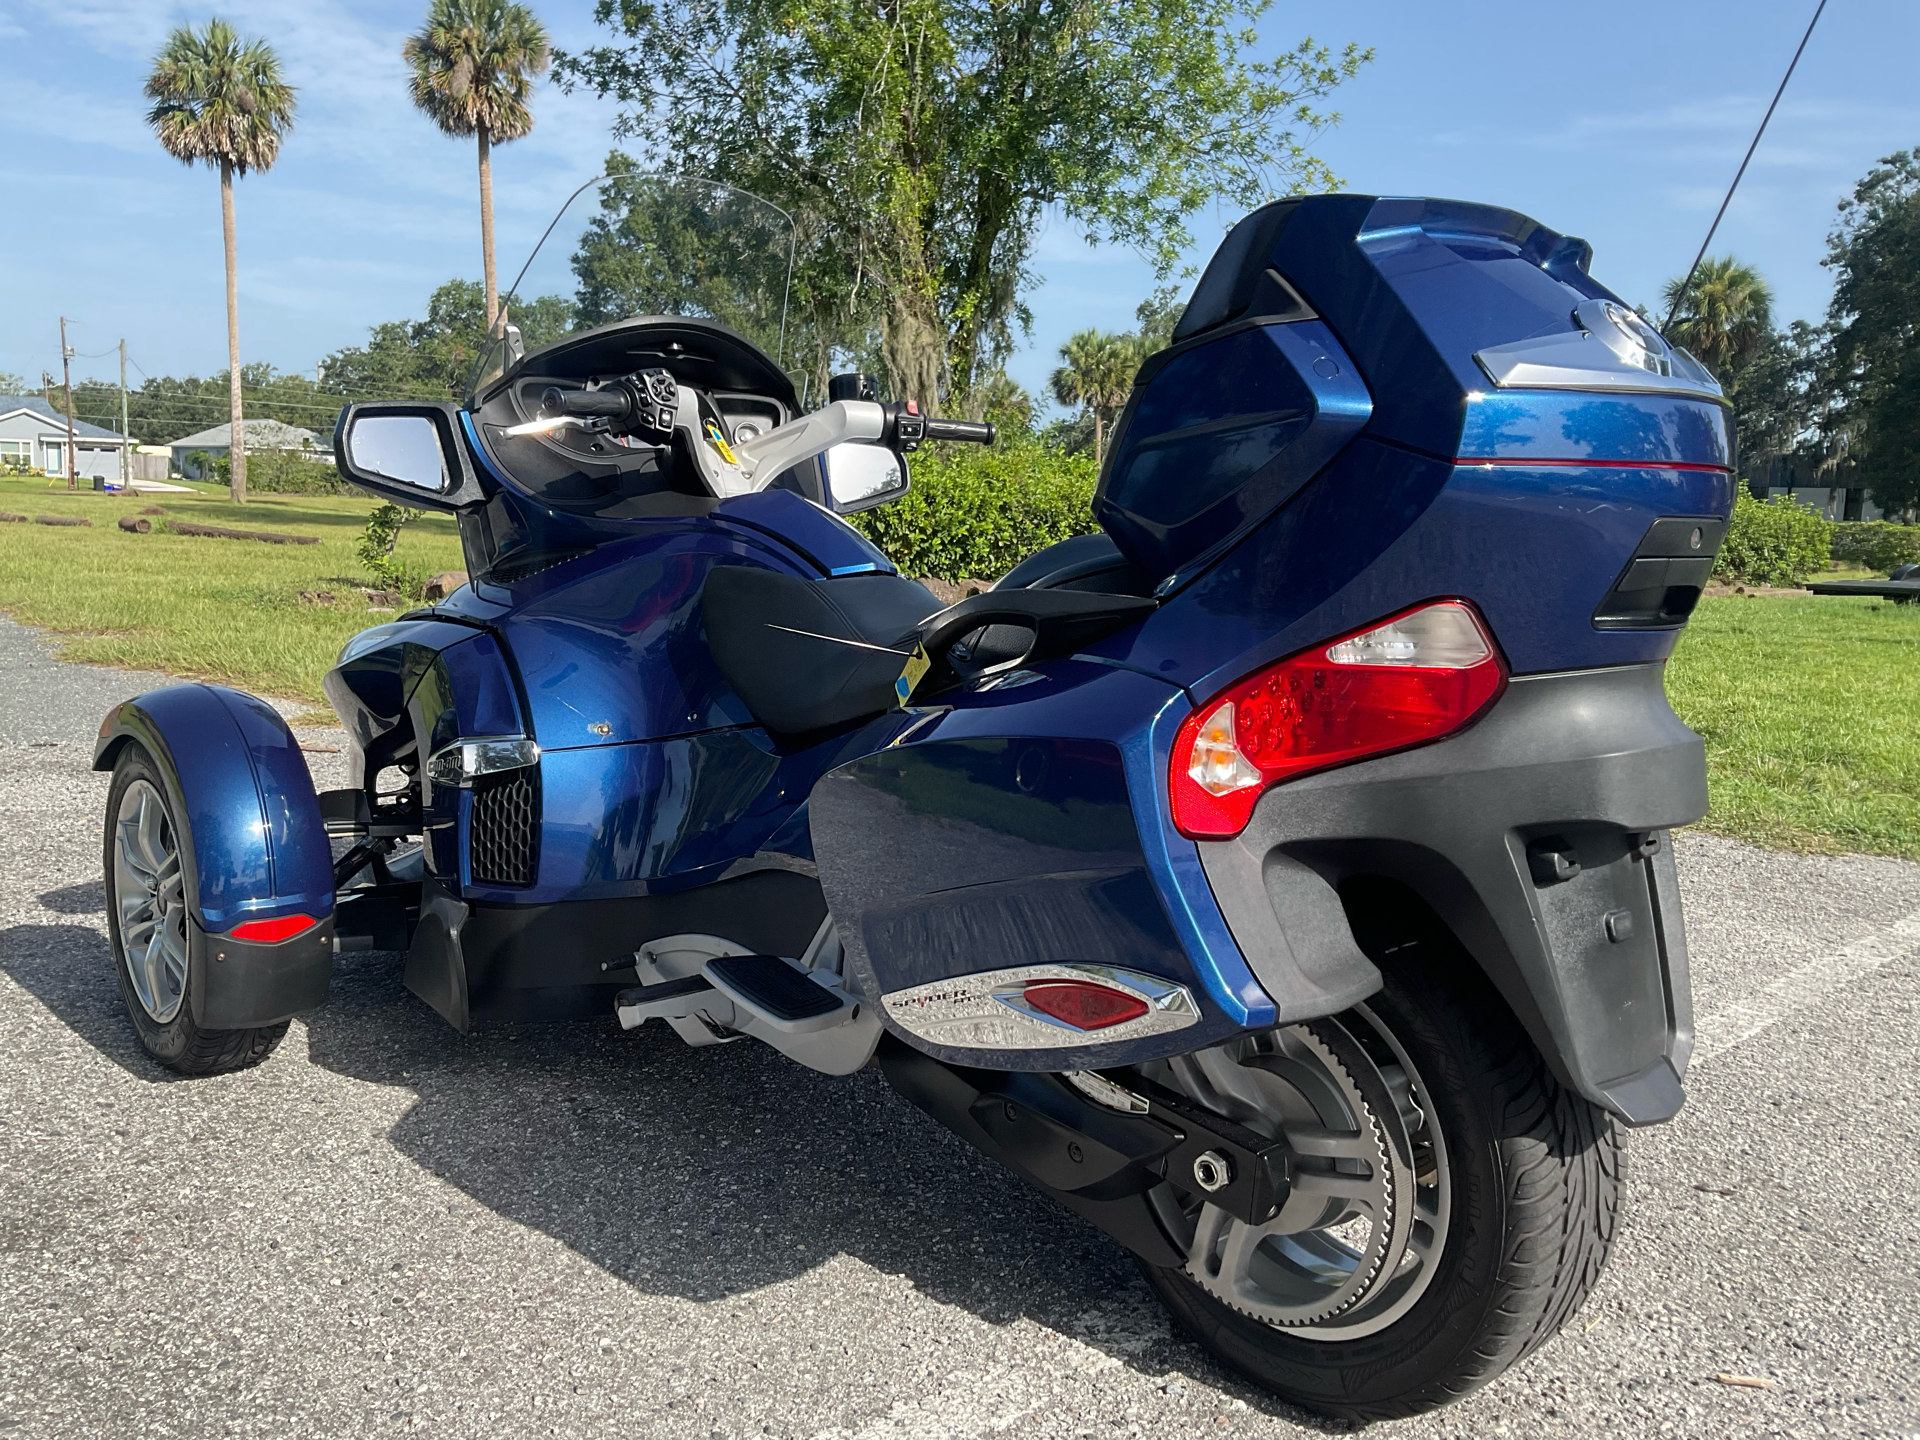 2011 Can-Am Spyder® RT-S SM5 in Sanford, Florida - Photo 8